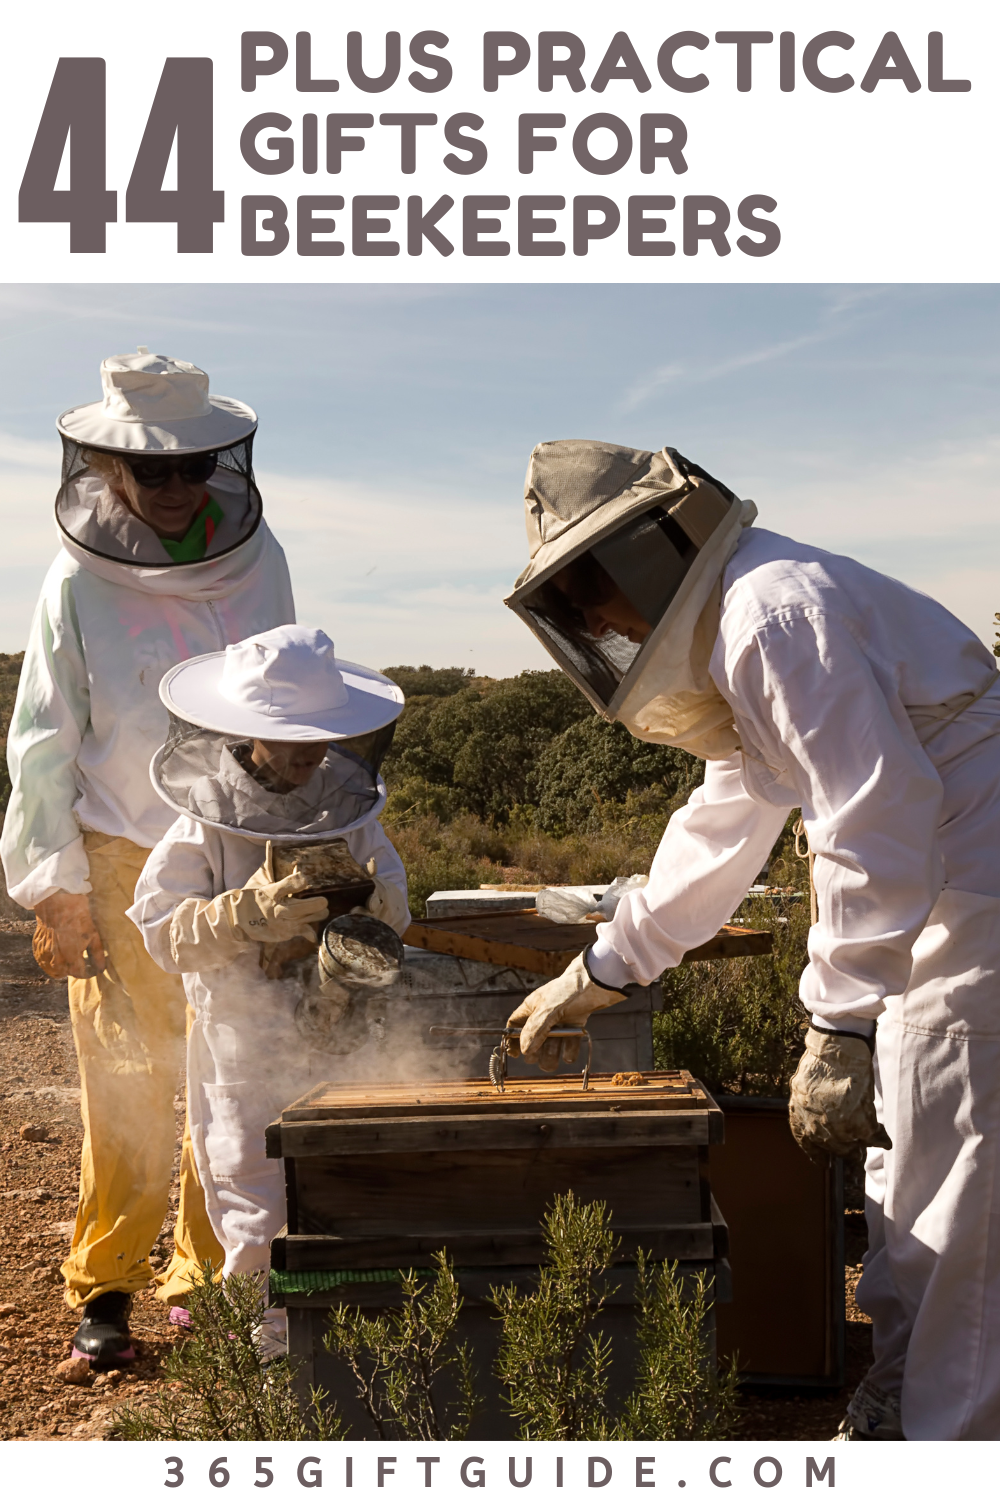 44-Plus-Practical-Gifts-for-Beekeepers